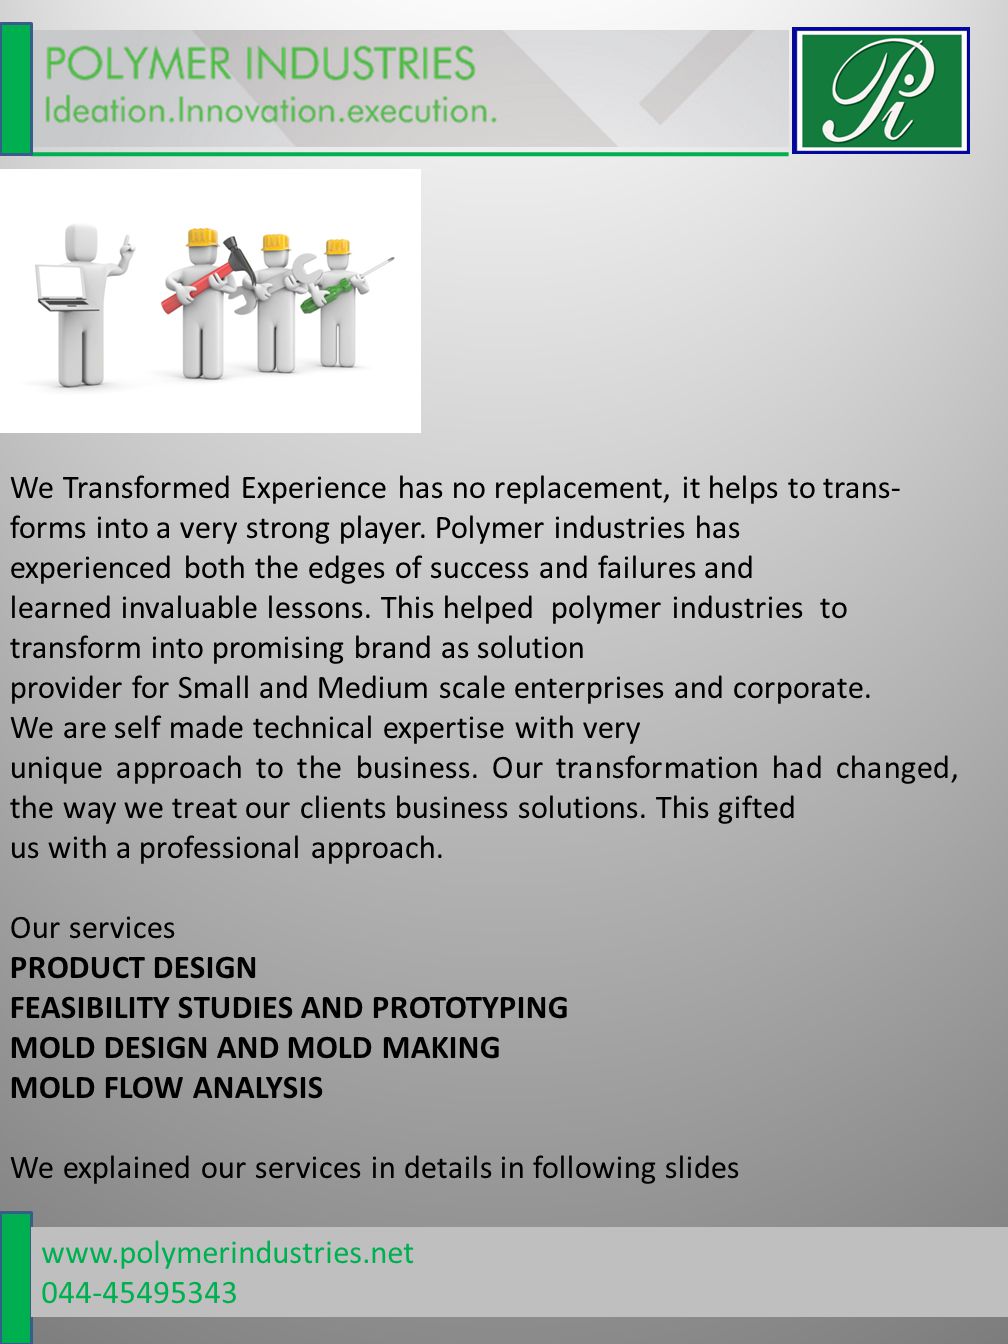 We Transformed Experience has no replacement, it helps to trans- forms into a very strong player.